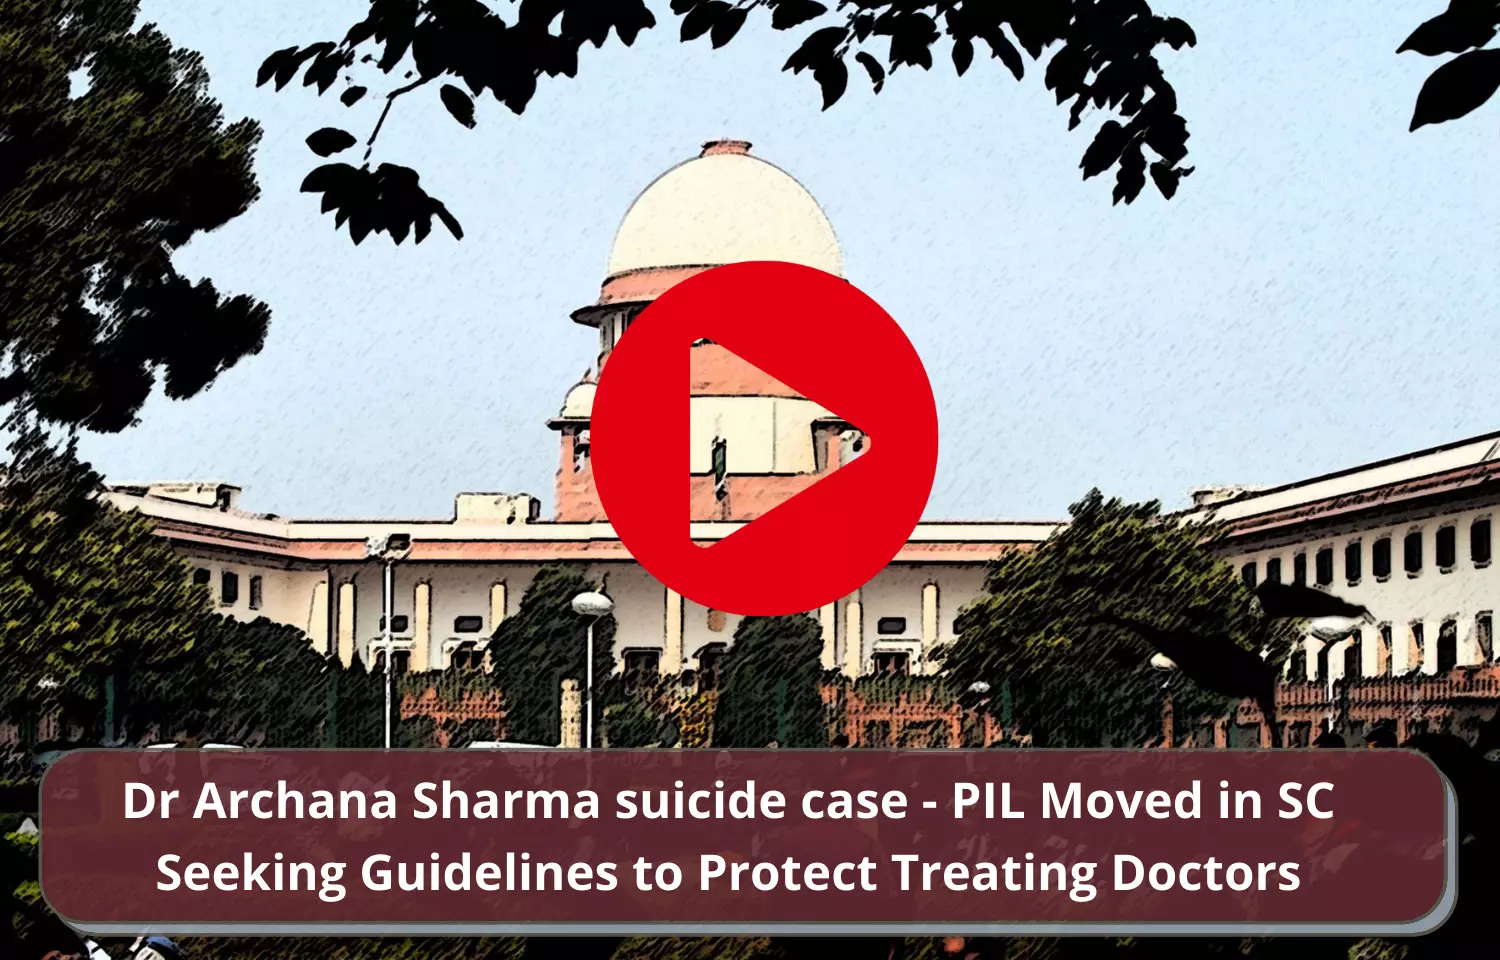 Dr Archana Sharma suicide case: Plea in SC demands guidelines for protection of doctors